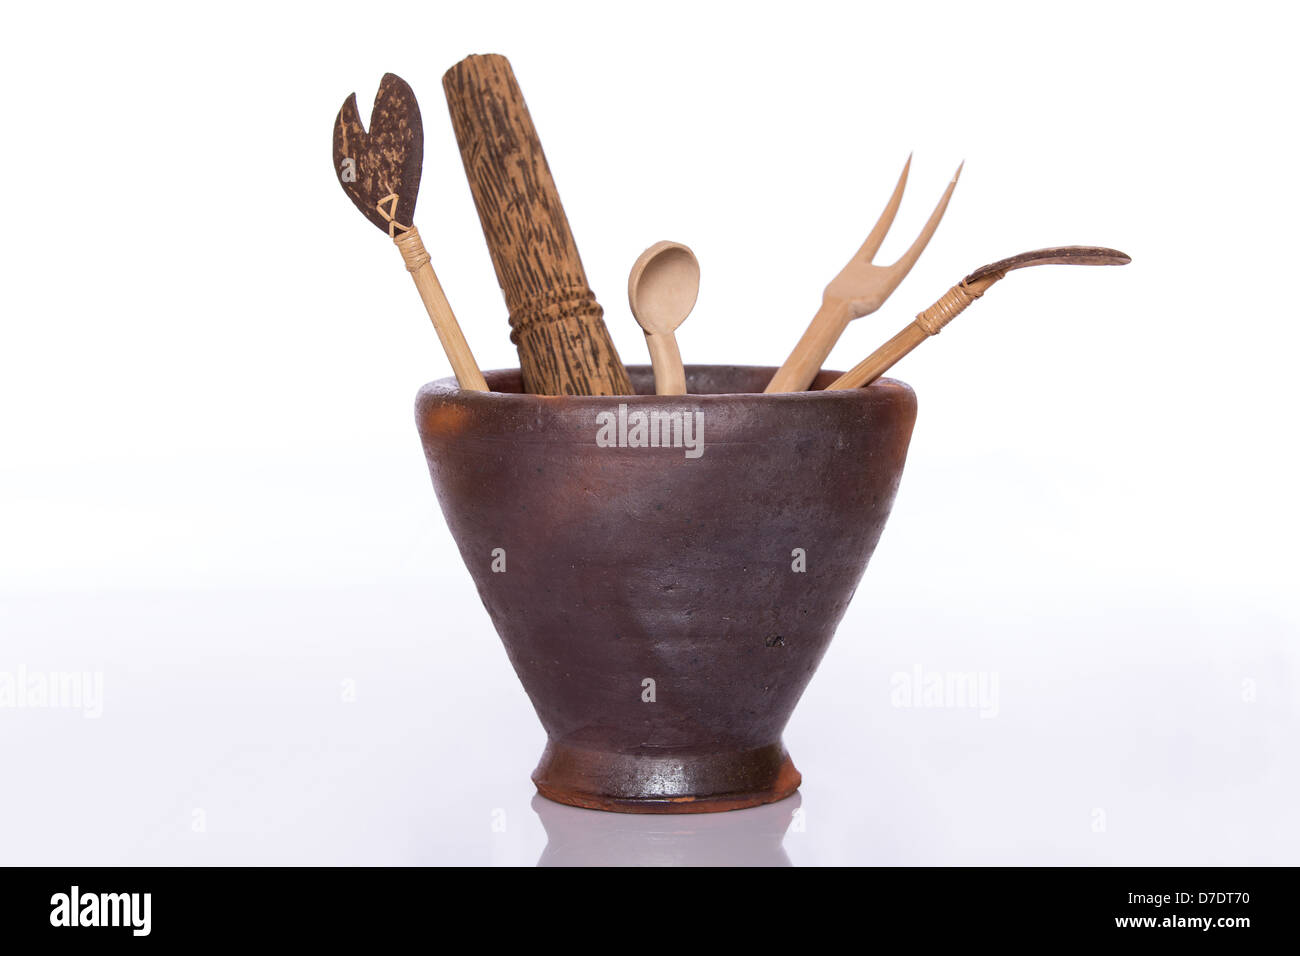 Kitchen wood tools in a ceramic jar on white background Stock Photo